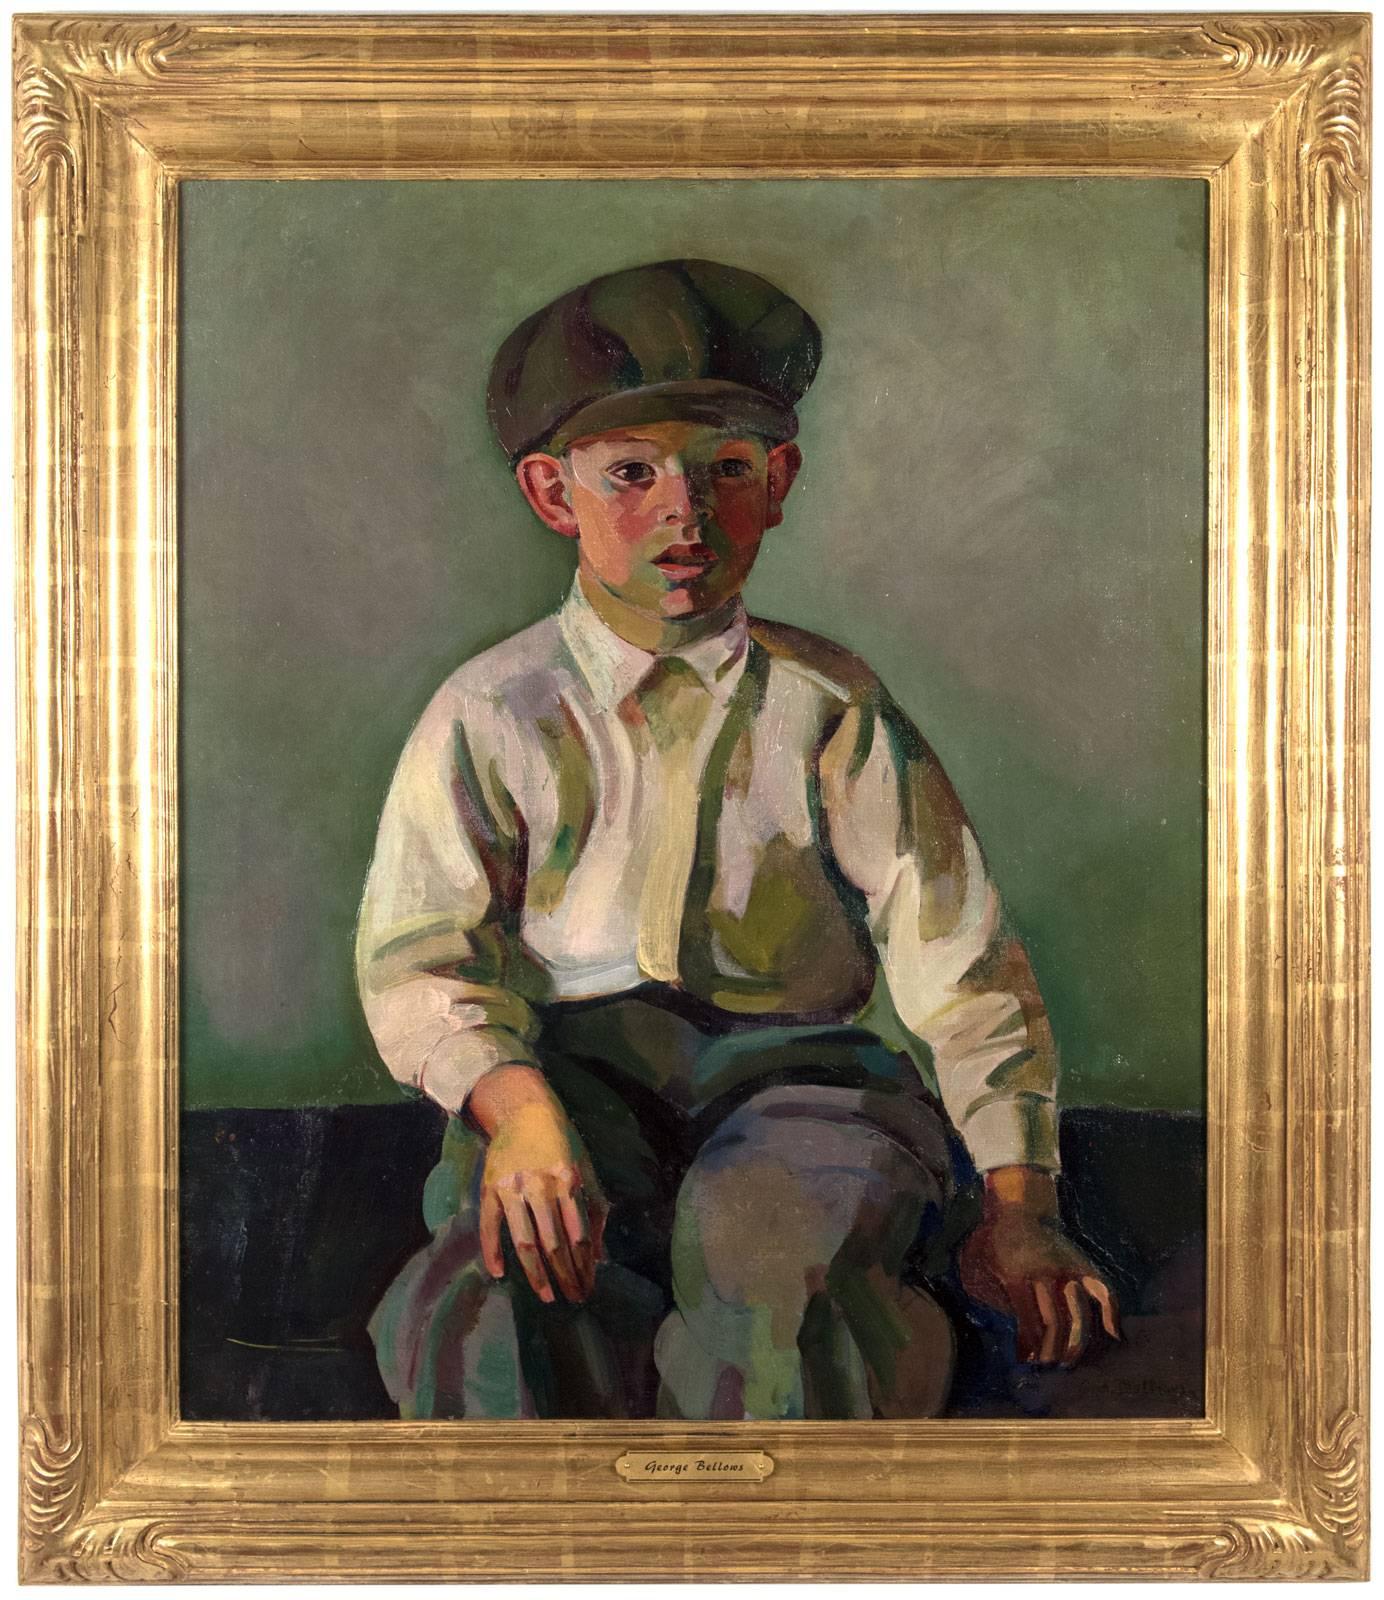 This portrait depicts an unglamorized picture of a young boy in a cap, dress shirt and slacks. His hand rests casually on his knee, and his mouth is slightly agap, lending to the sense of informality. A bold palette is used in this representation -